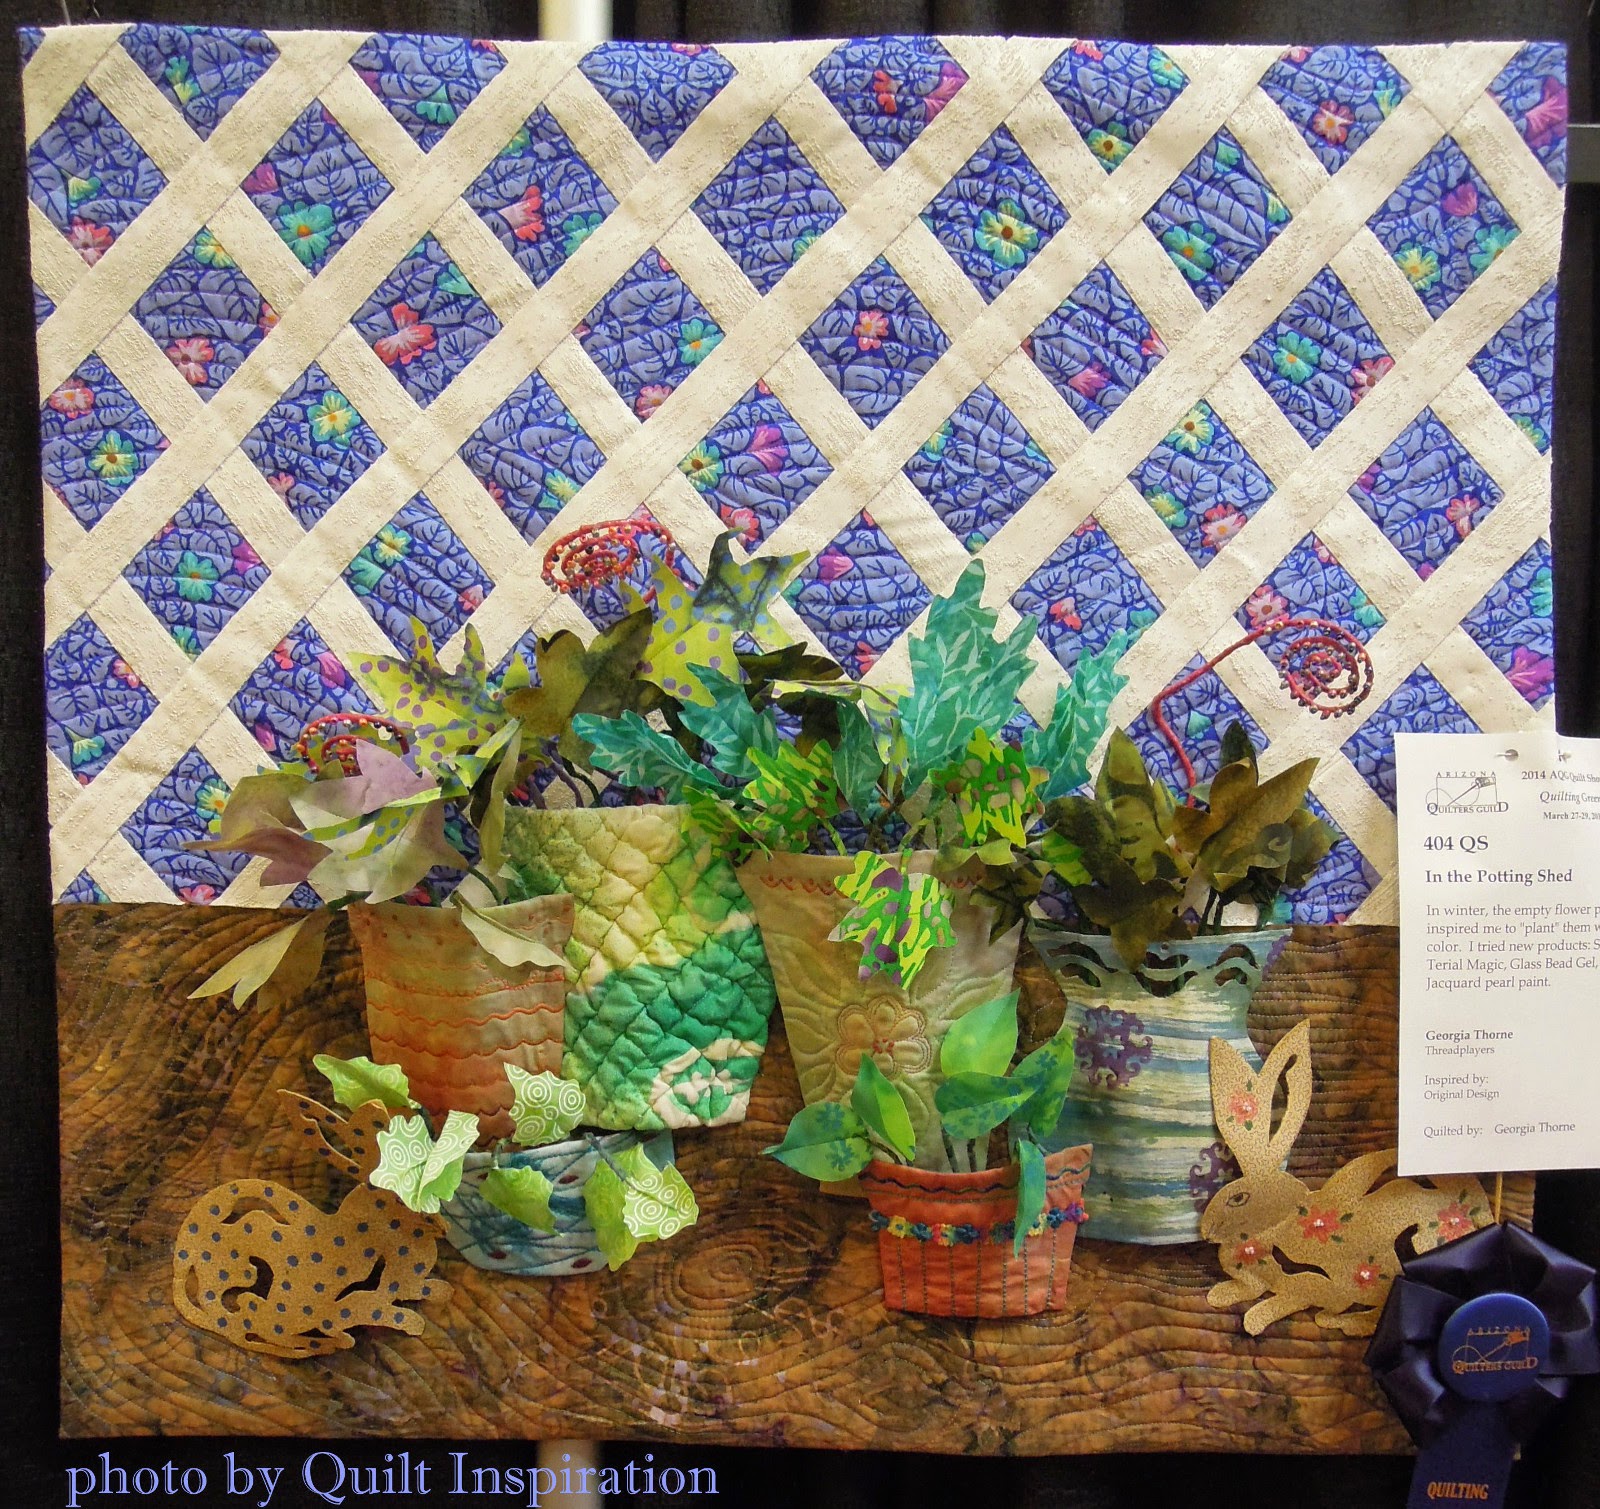 Quilt Inspiration: Another dimension in quilting: 3D Quilts